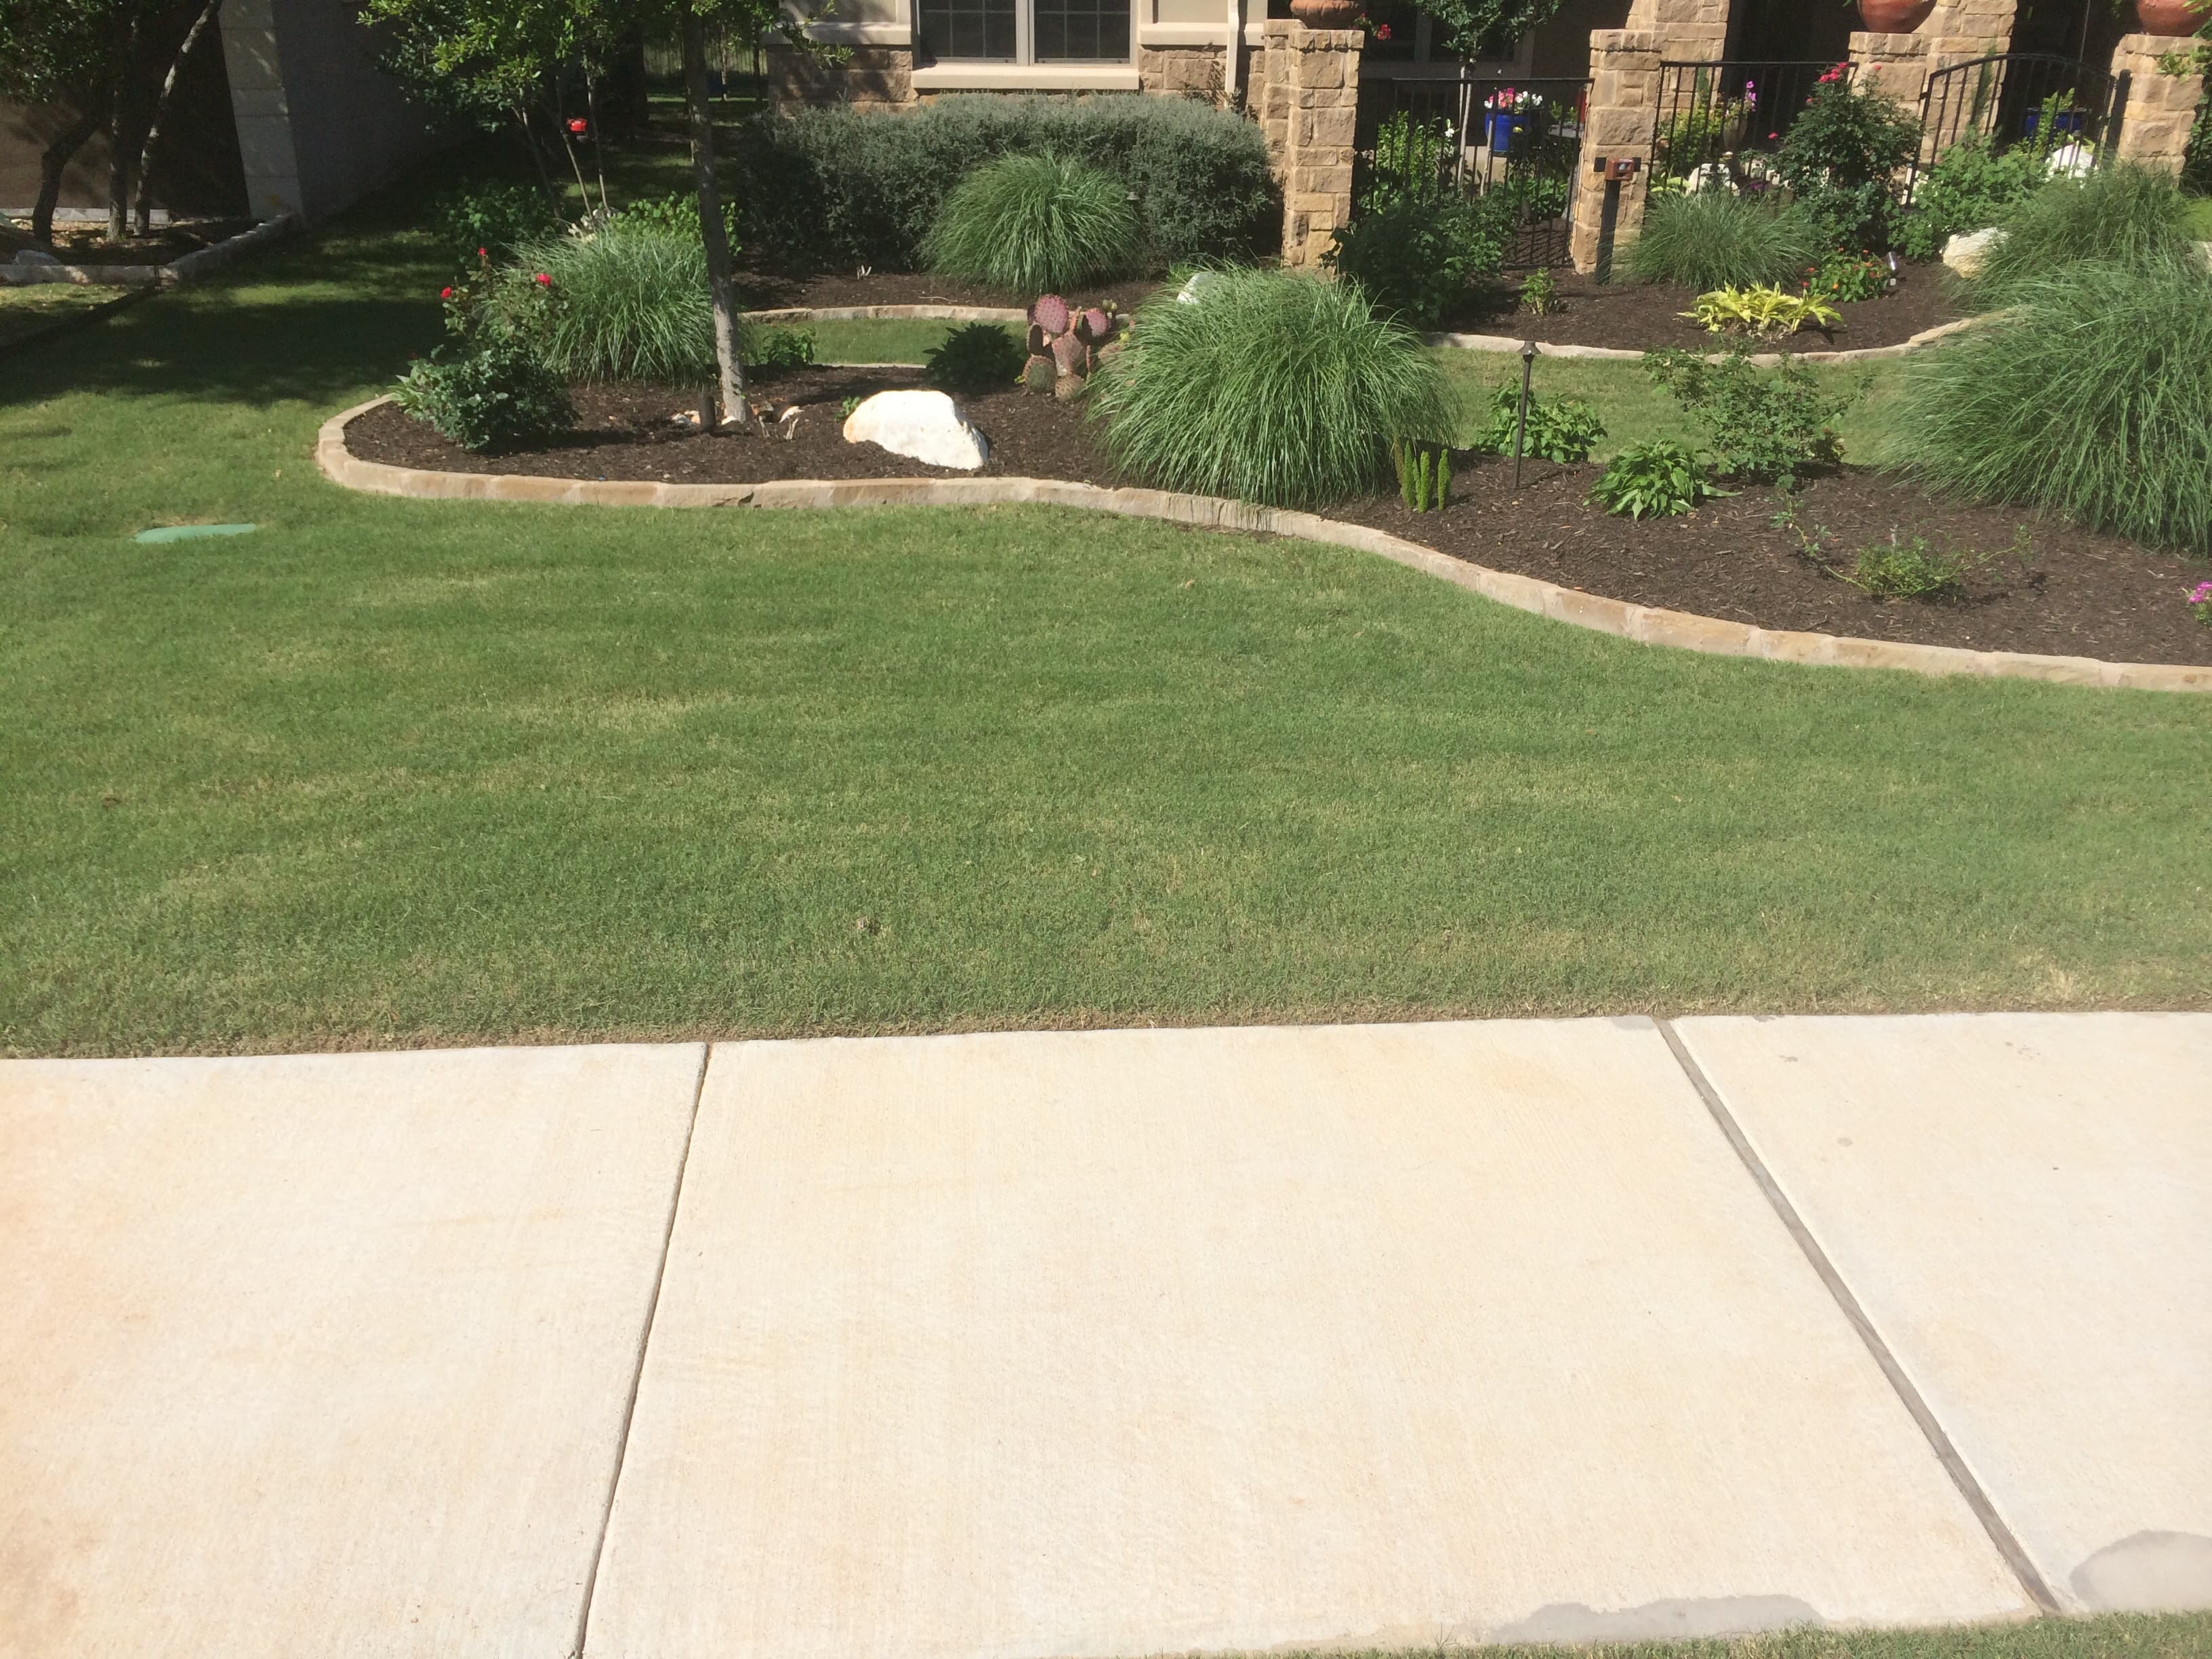 Best lawn care service in town because we care